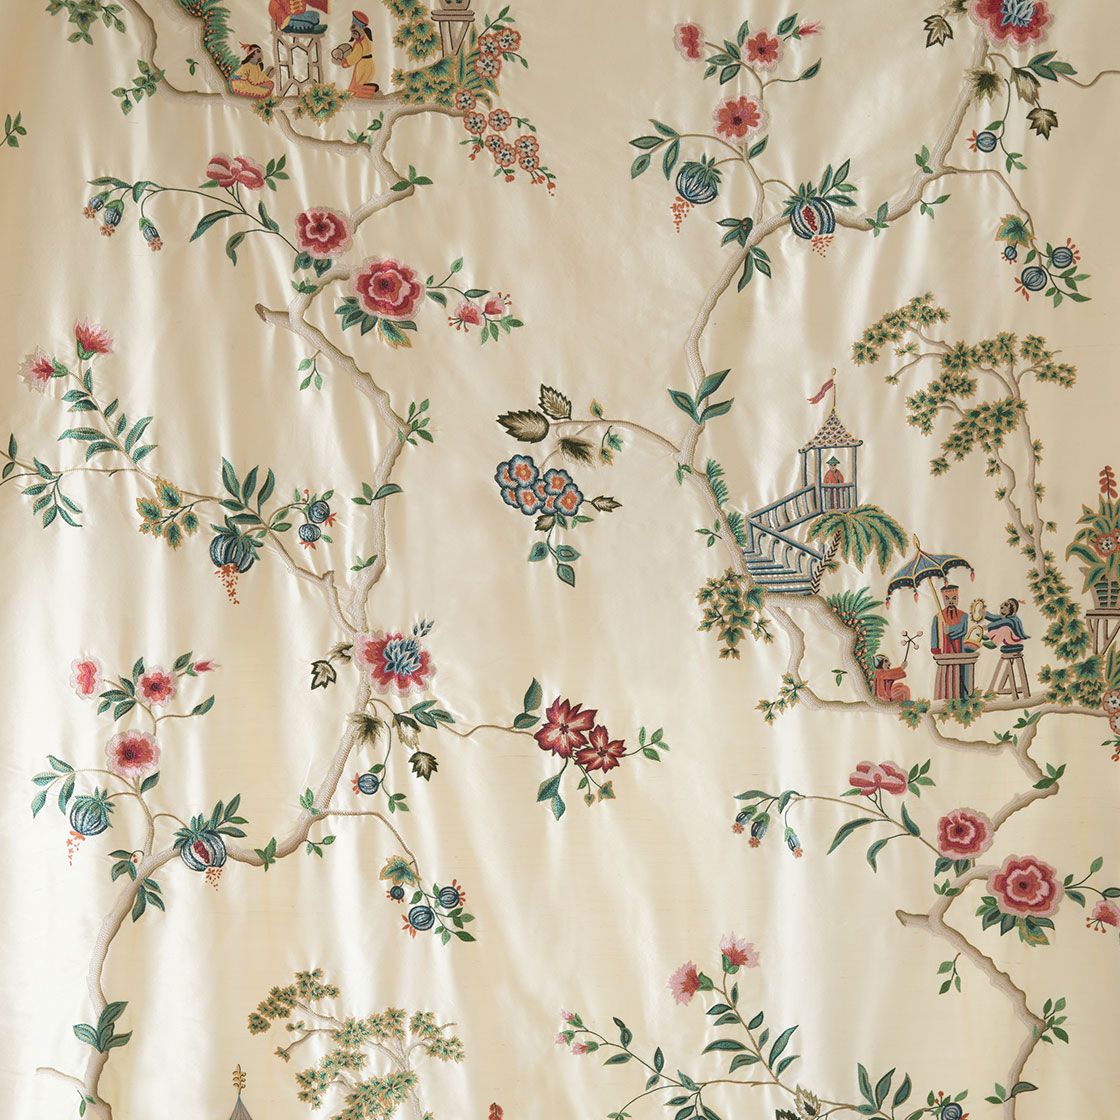 Cathay embroidery on Plain silk - Alabaster - Beaumont & Fletcher